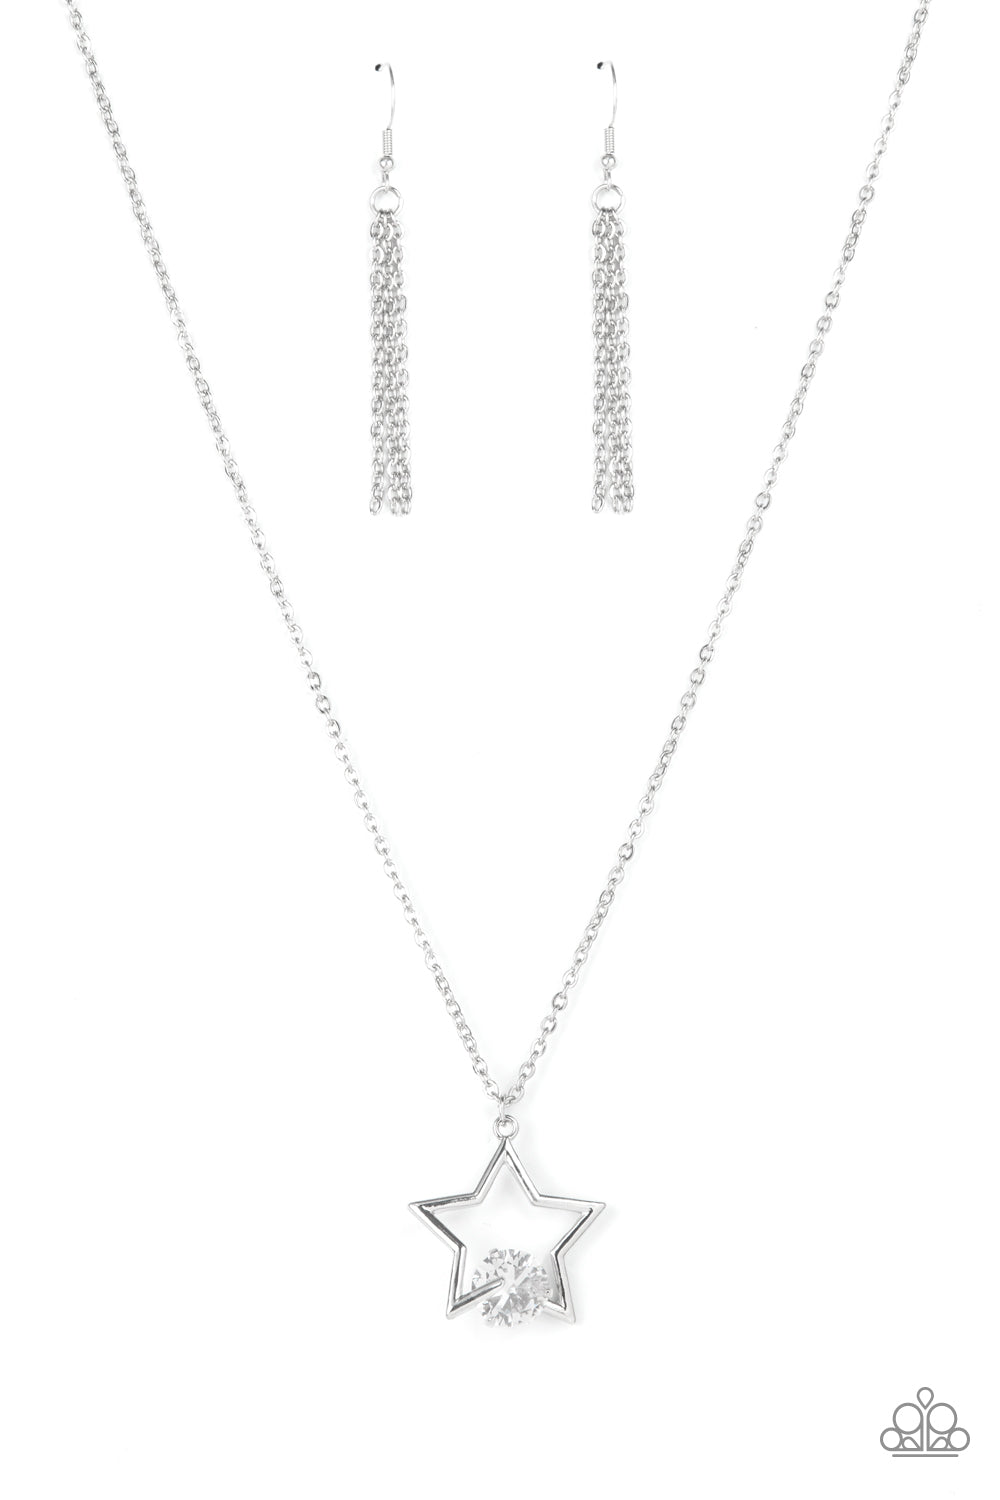 Paparazzi Starry Fireworks - White Necklace - A Finishing Touch Jewelry